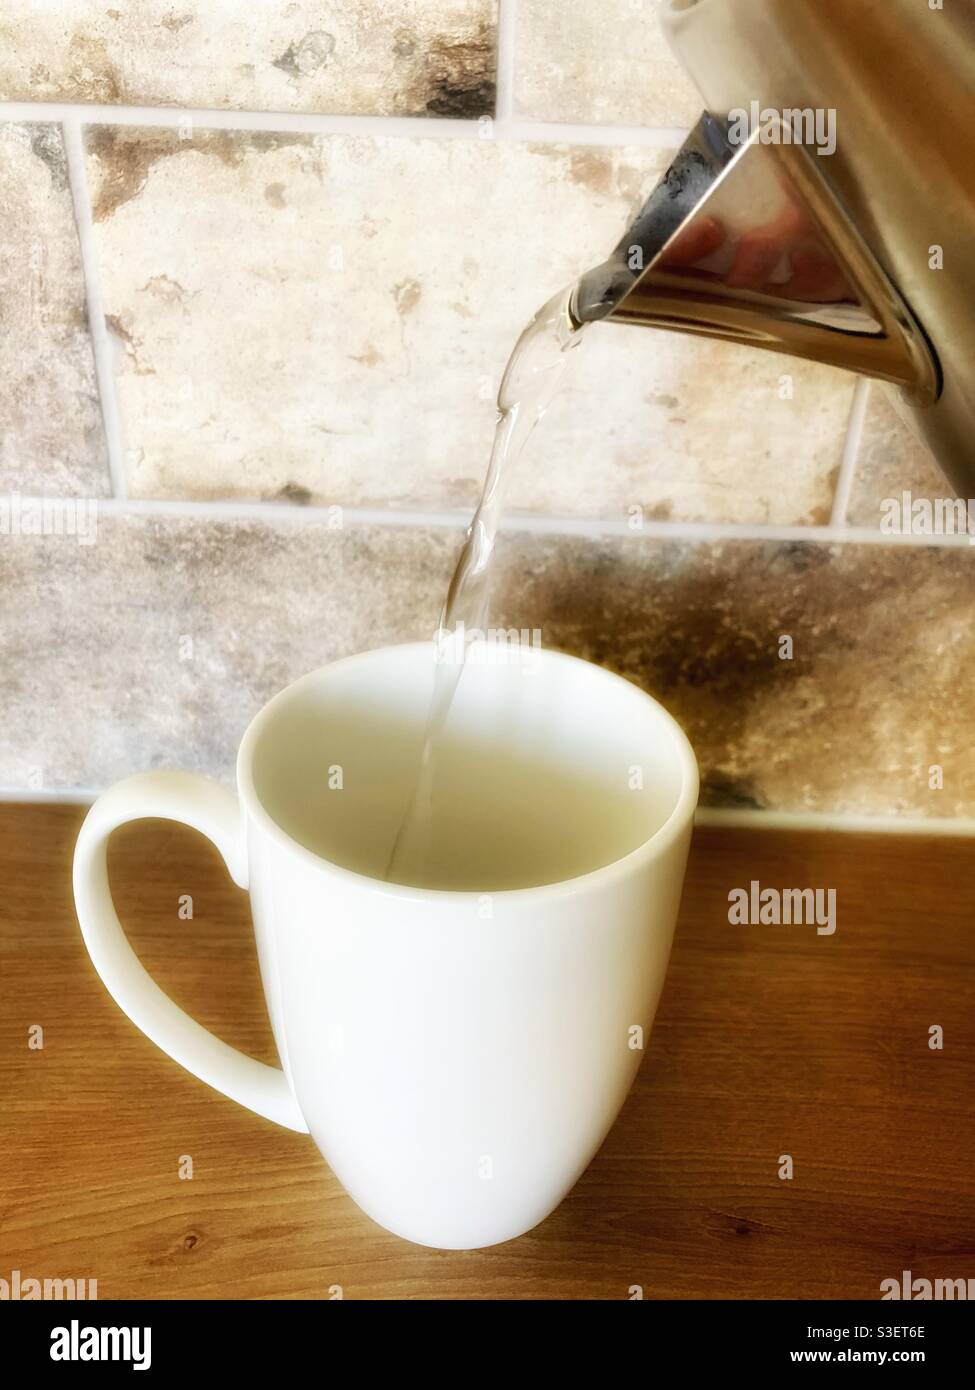 Pouring hot water from a kettle into a white mug to make a cup of tea in the kitchen Stock Photo